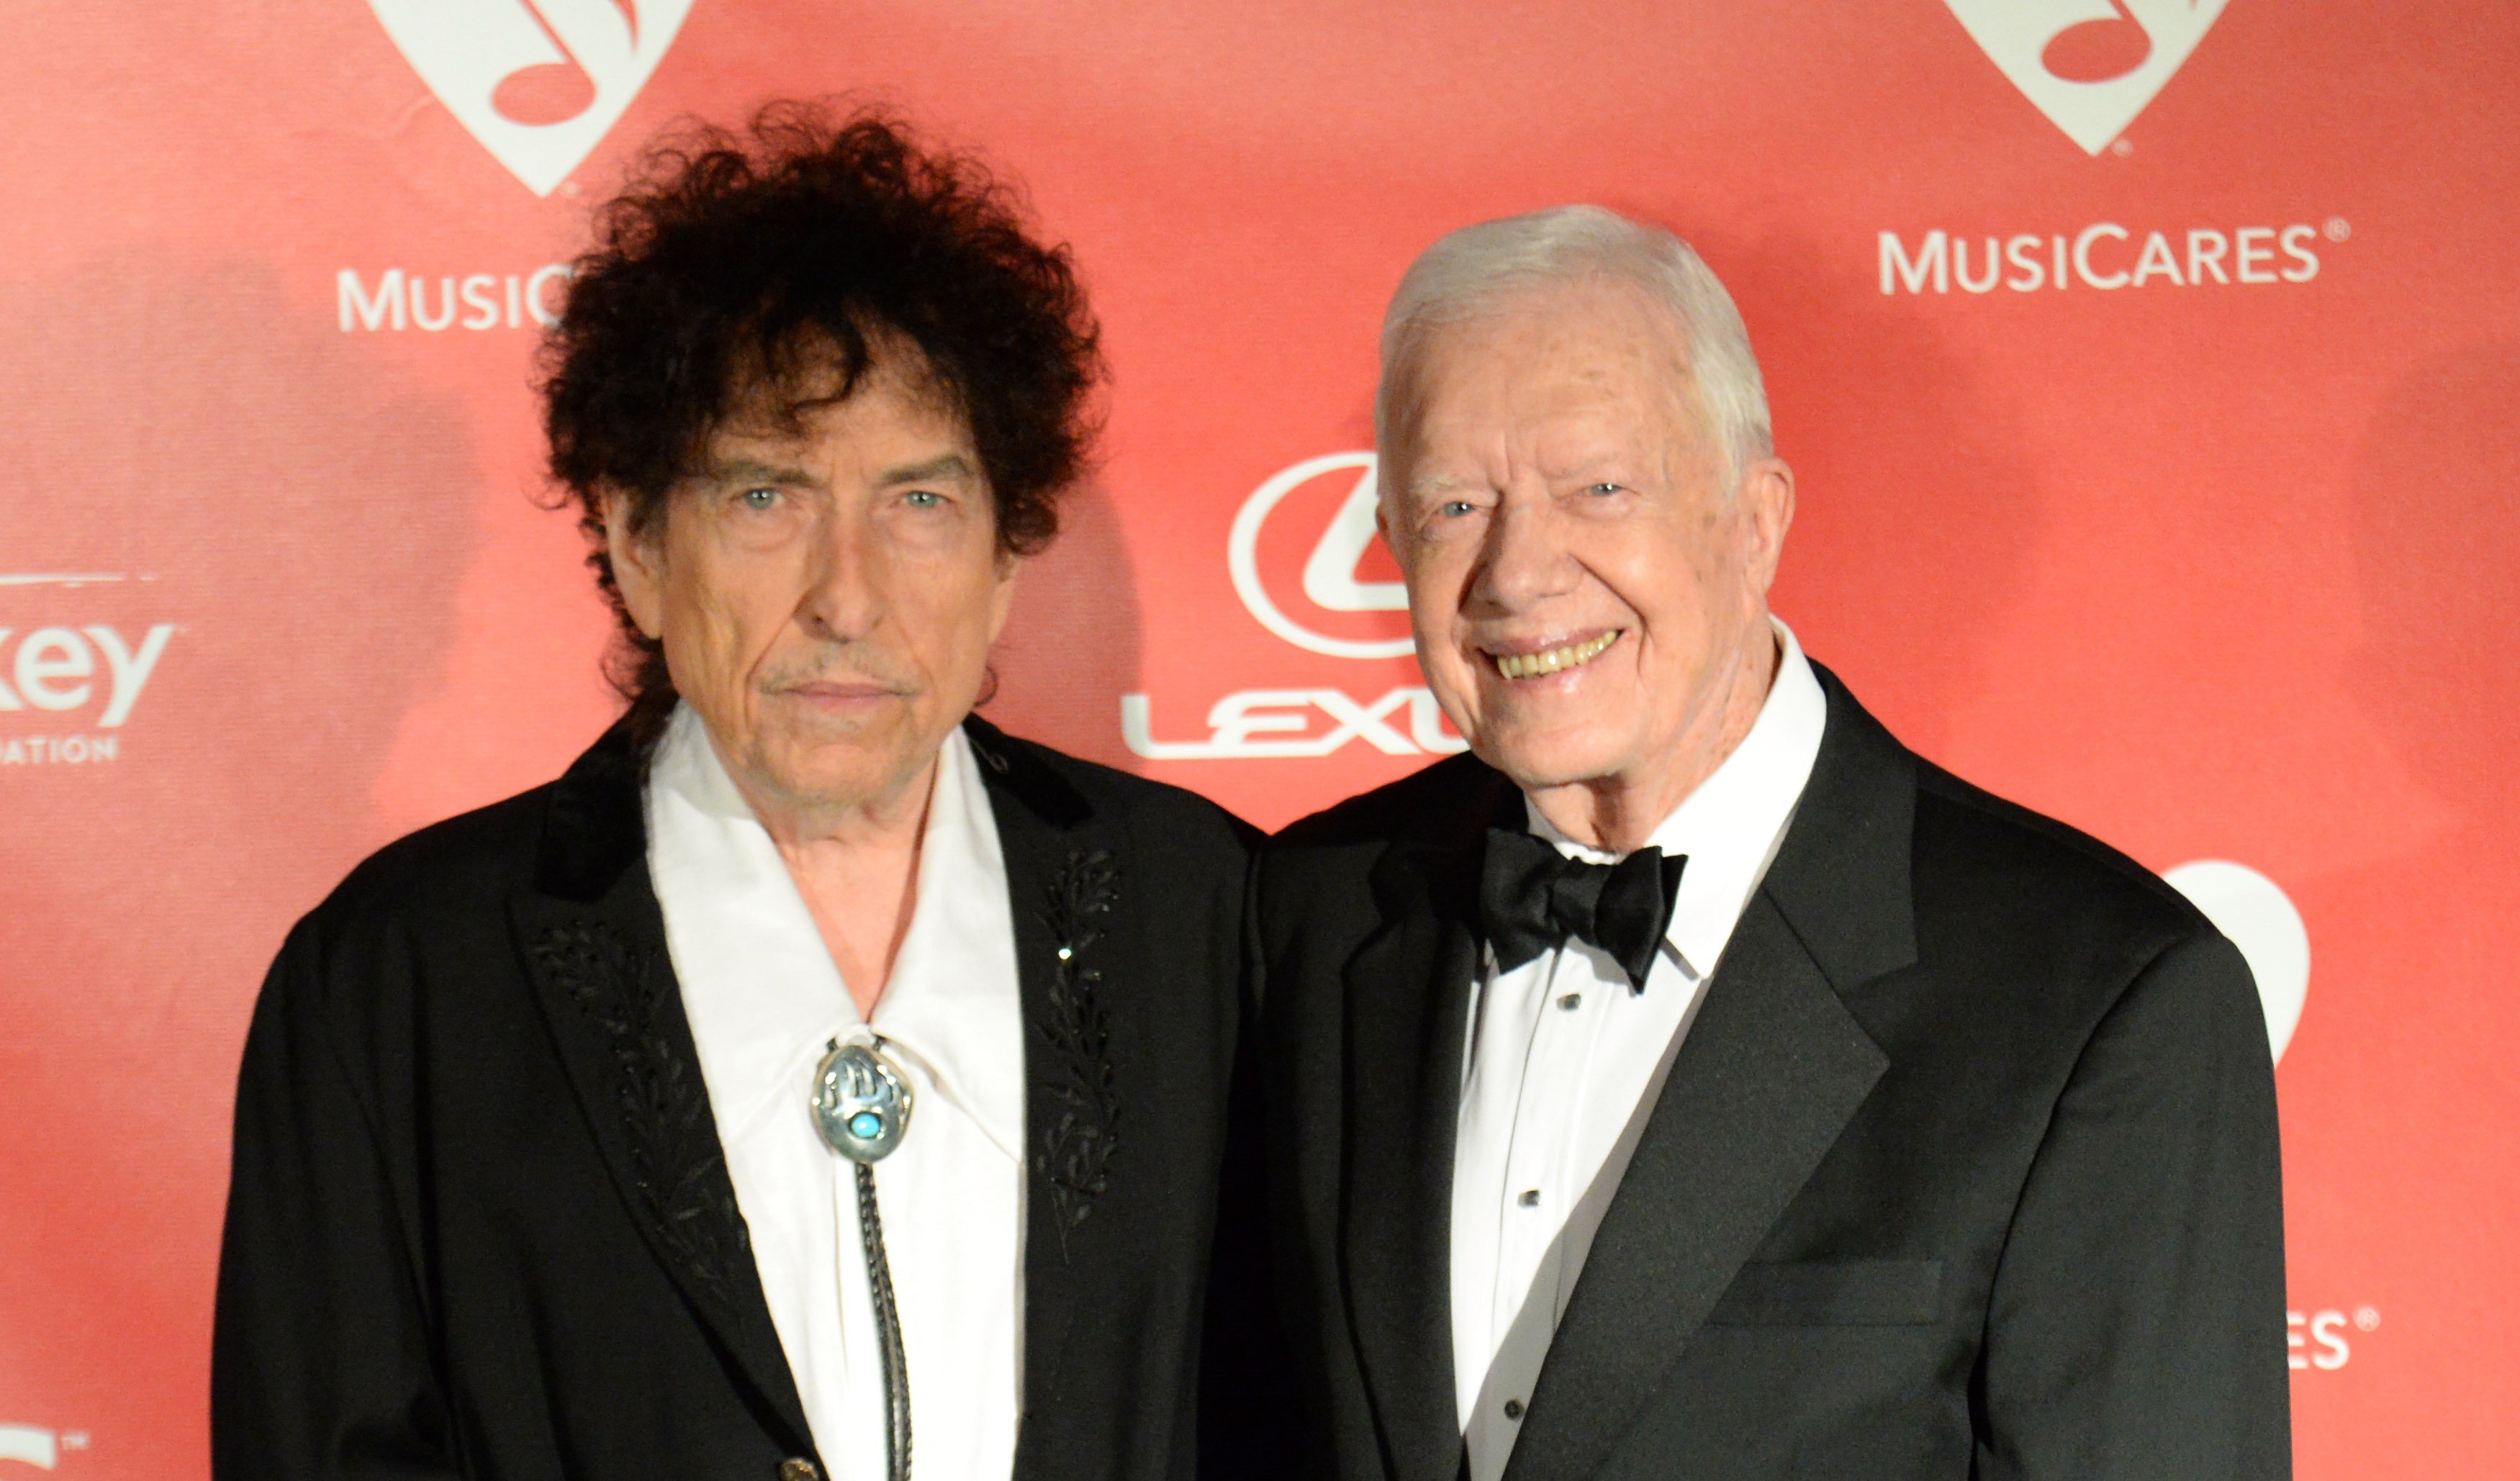 Bob Dylan and Jimmy Carter wear black and stand in front of a red background.